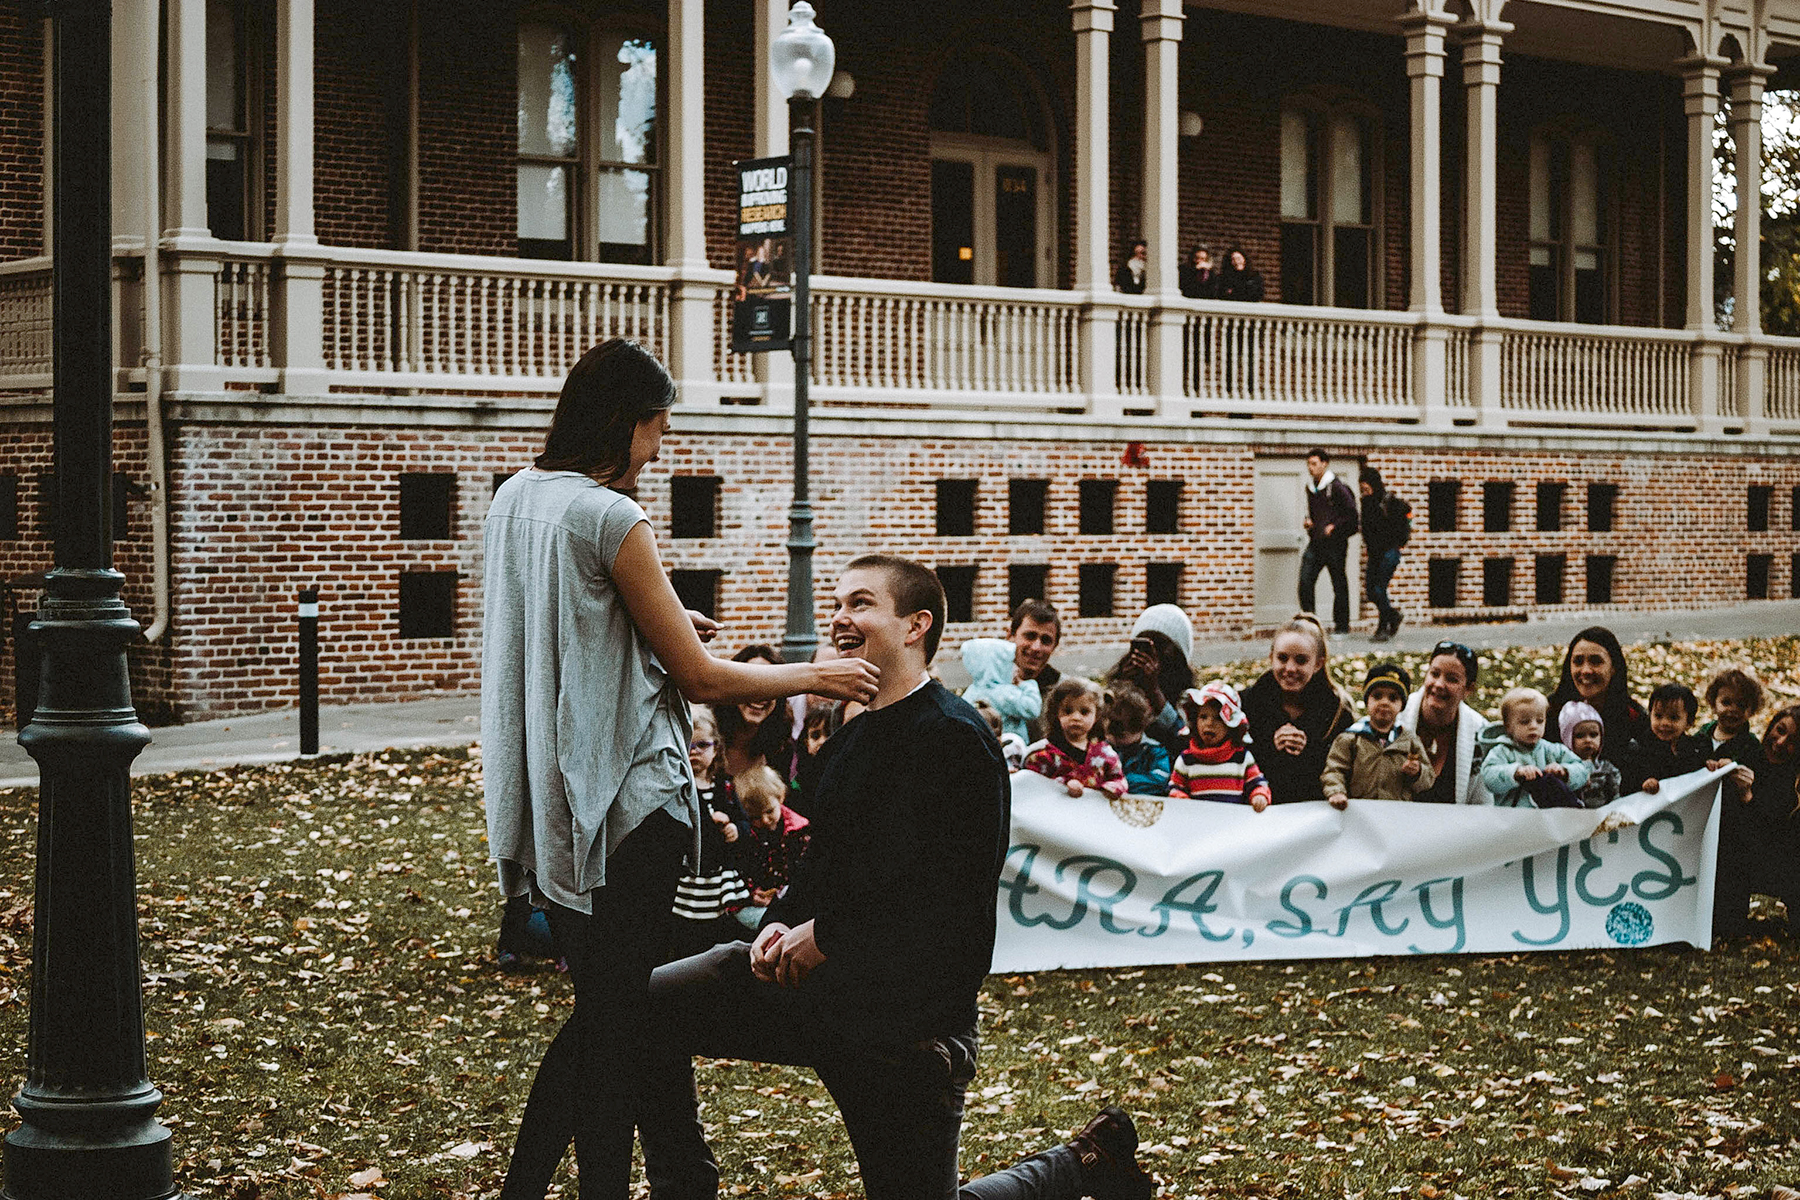 PHOTO: Dallin Knecht proposed to preschool teacher Sara Trigero with the help of her beloved students on Nov. 3 in Reno, Nevada.